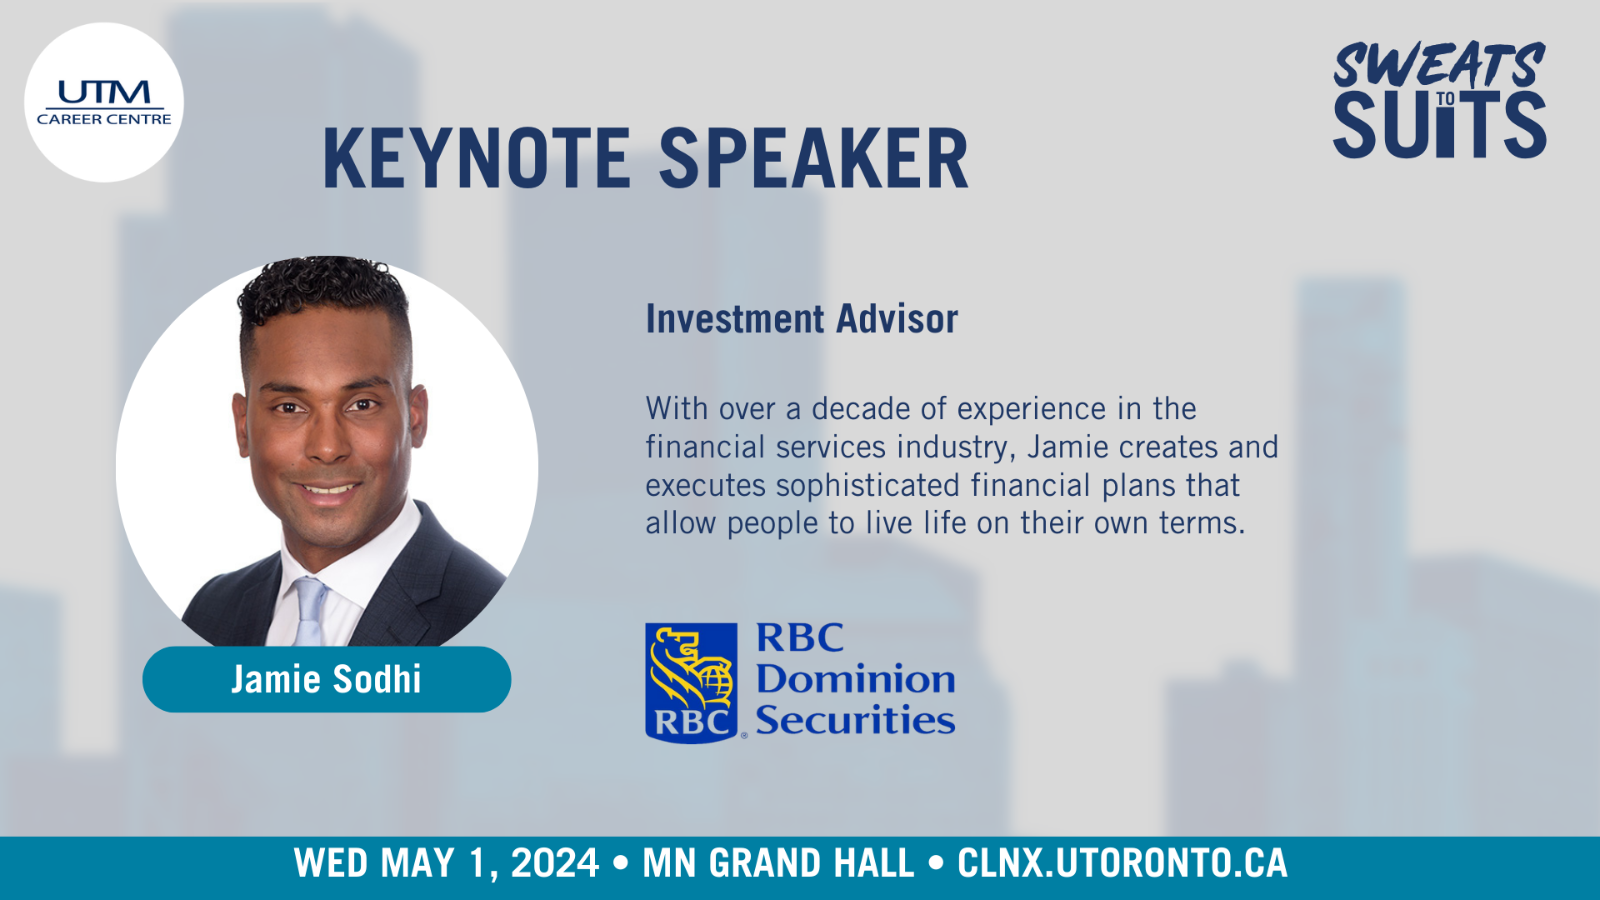 Keynote speaker Jamie Sodhi. With over a decode of experience in the financial services industry, Jamie creates and executes sophisticated financial plans that allow people to live life on their own terms. RBC logo